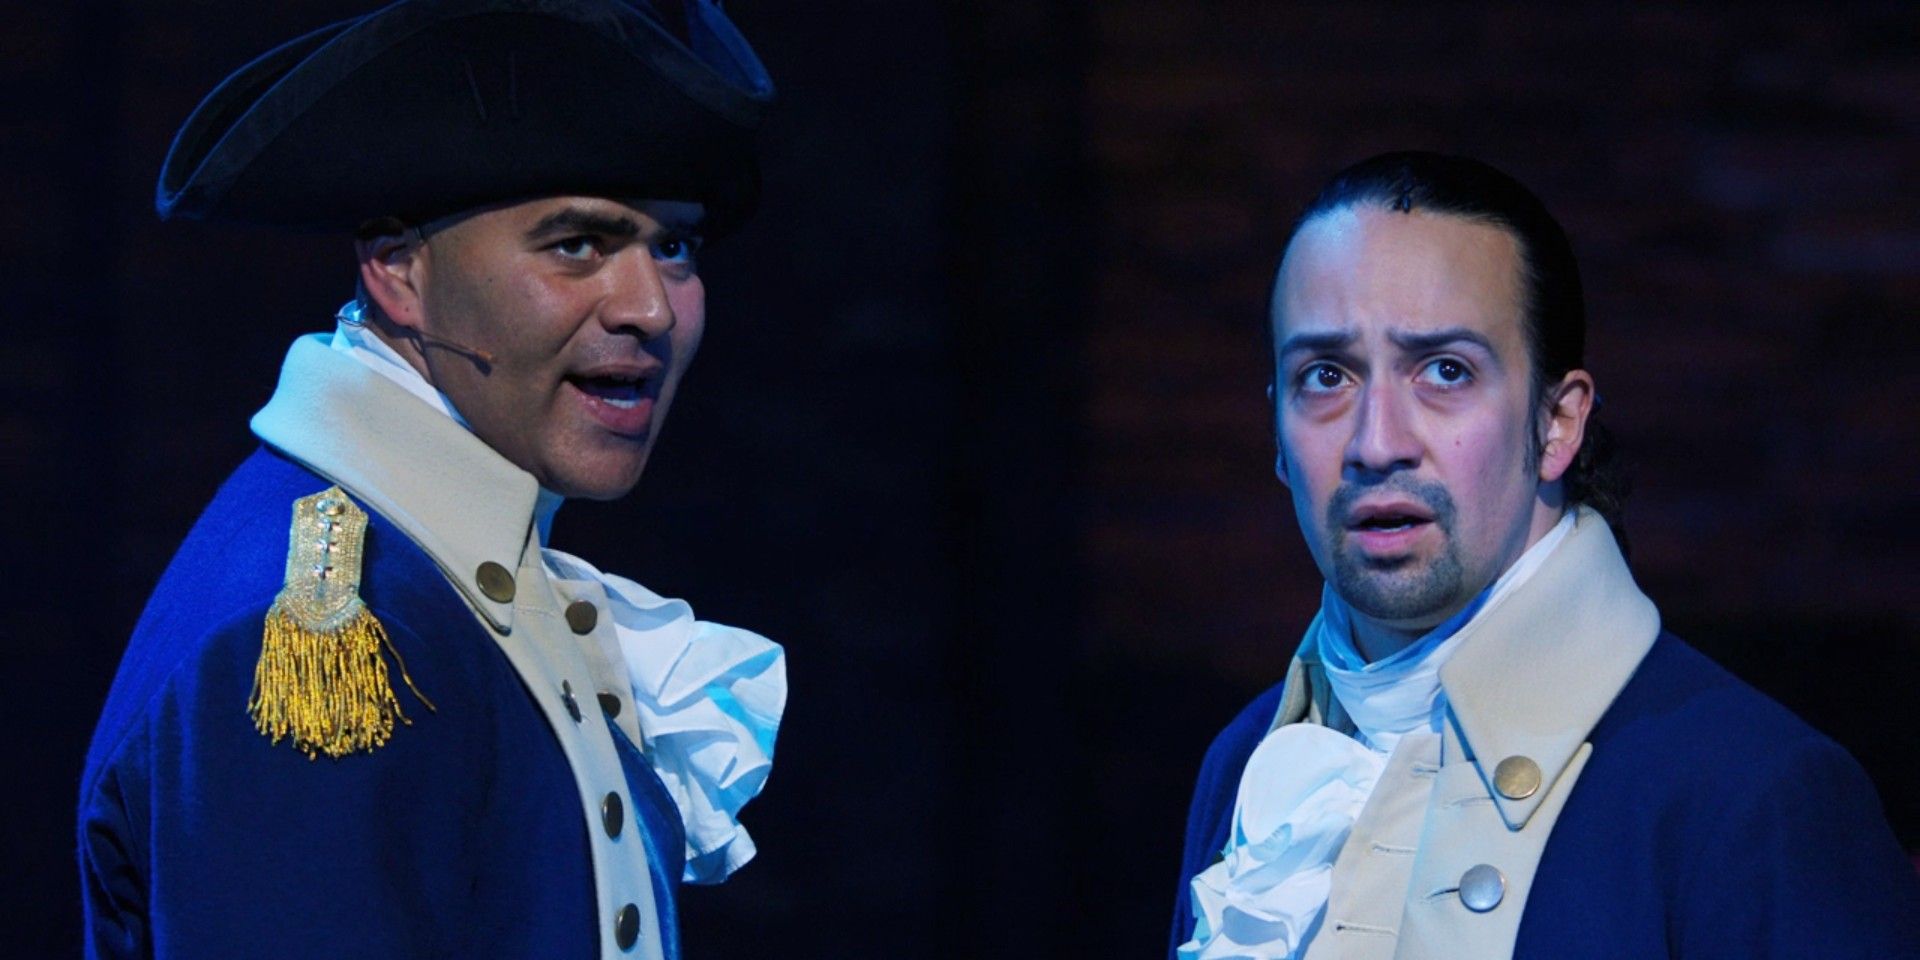 George Washington and Alexander Hamilton look out on the audience in Hamilton